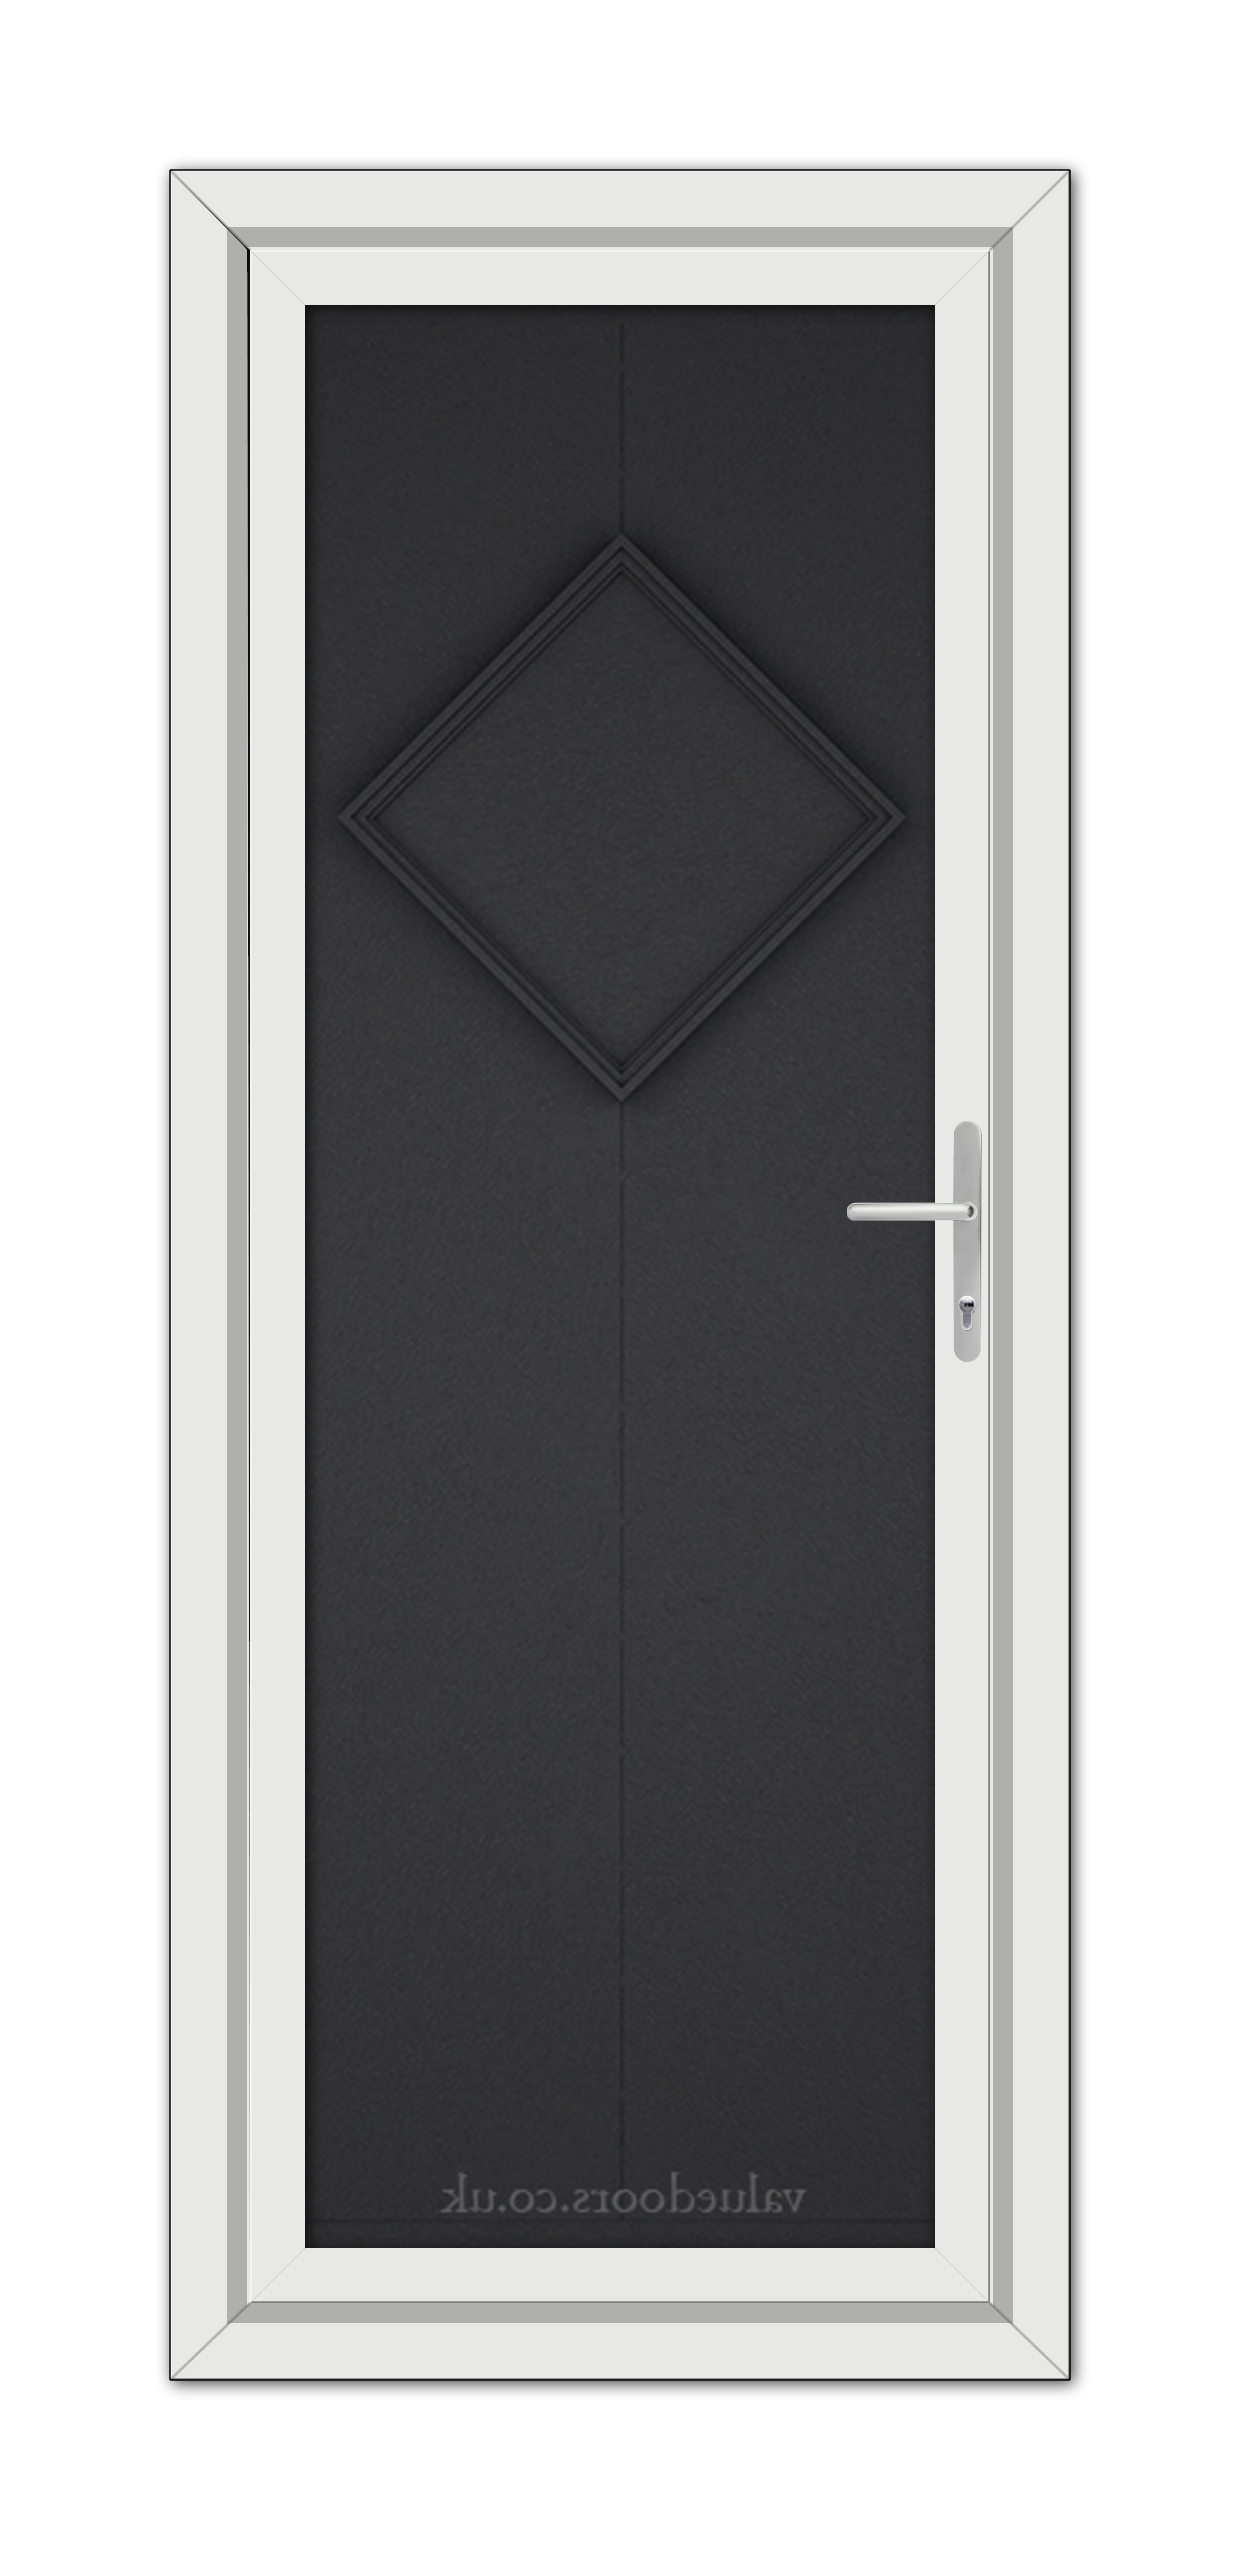 Modern Black Brown Hamburg Solid uPVC Door with a diamond pattern and a white frame, featuring a metallic handle on the right side.